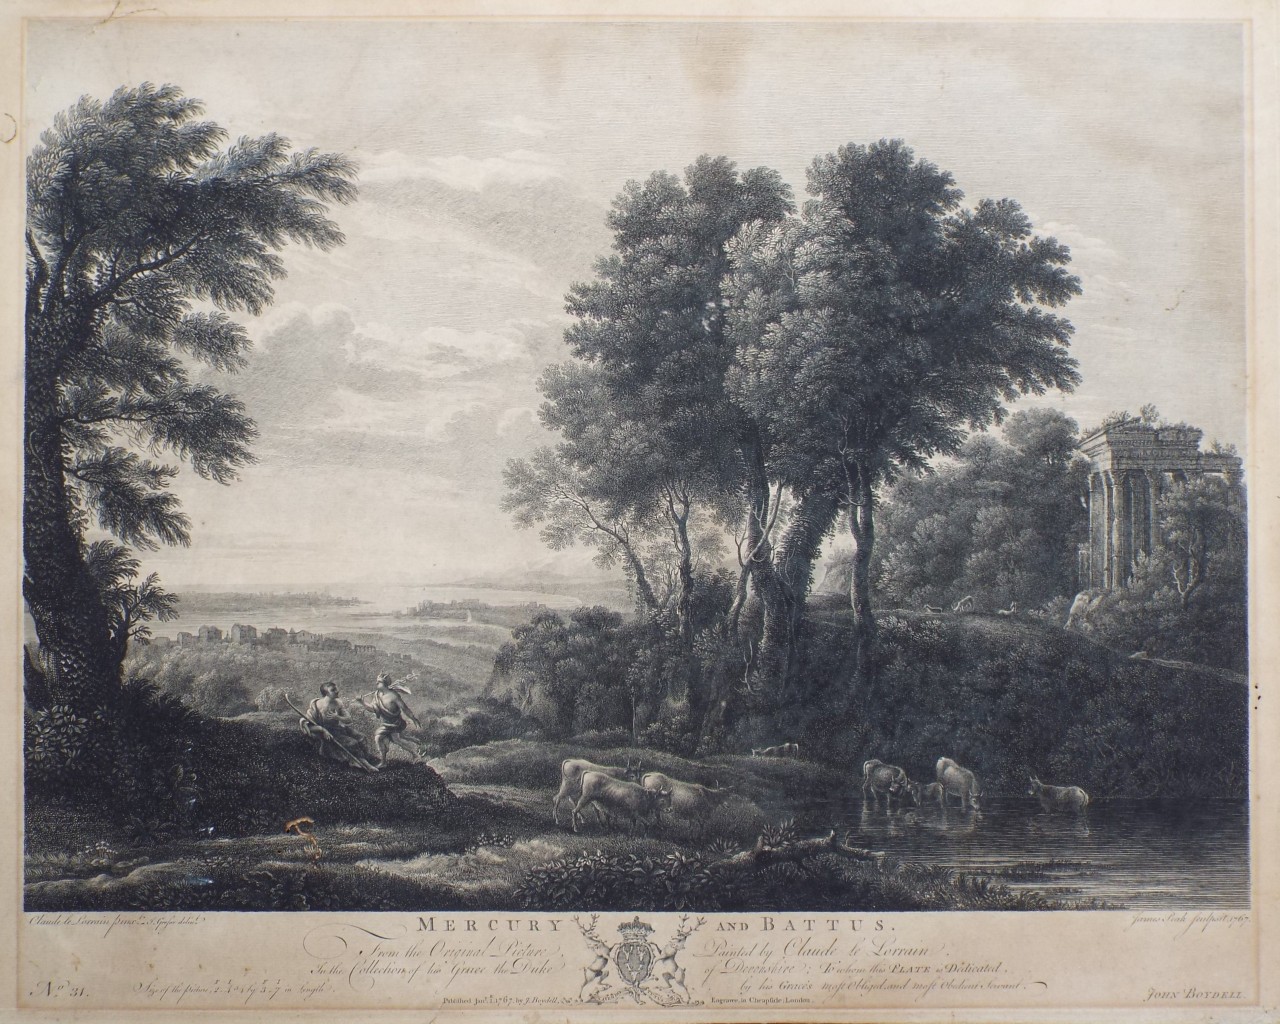 Print - Mercury and Battus From the Original Picture Painted by Claude le Lorrain, In the Collection of his Grace the Duke of Devonshire; To whom this Plate is Dedicated by his Grace's most Obliged and most Obedient Servant, John Boydell. - Peak